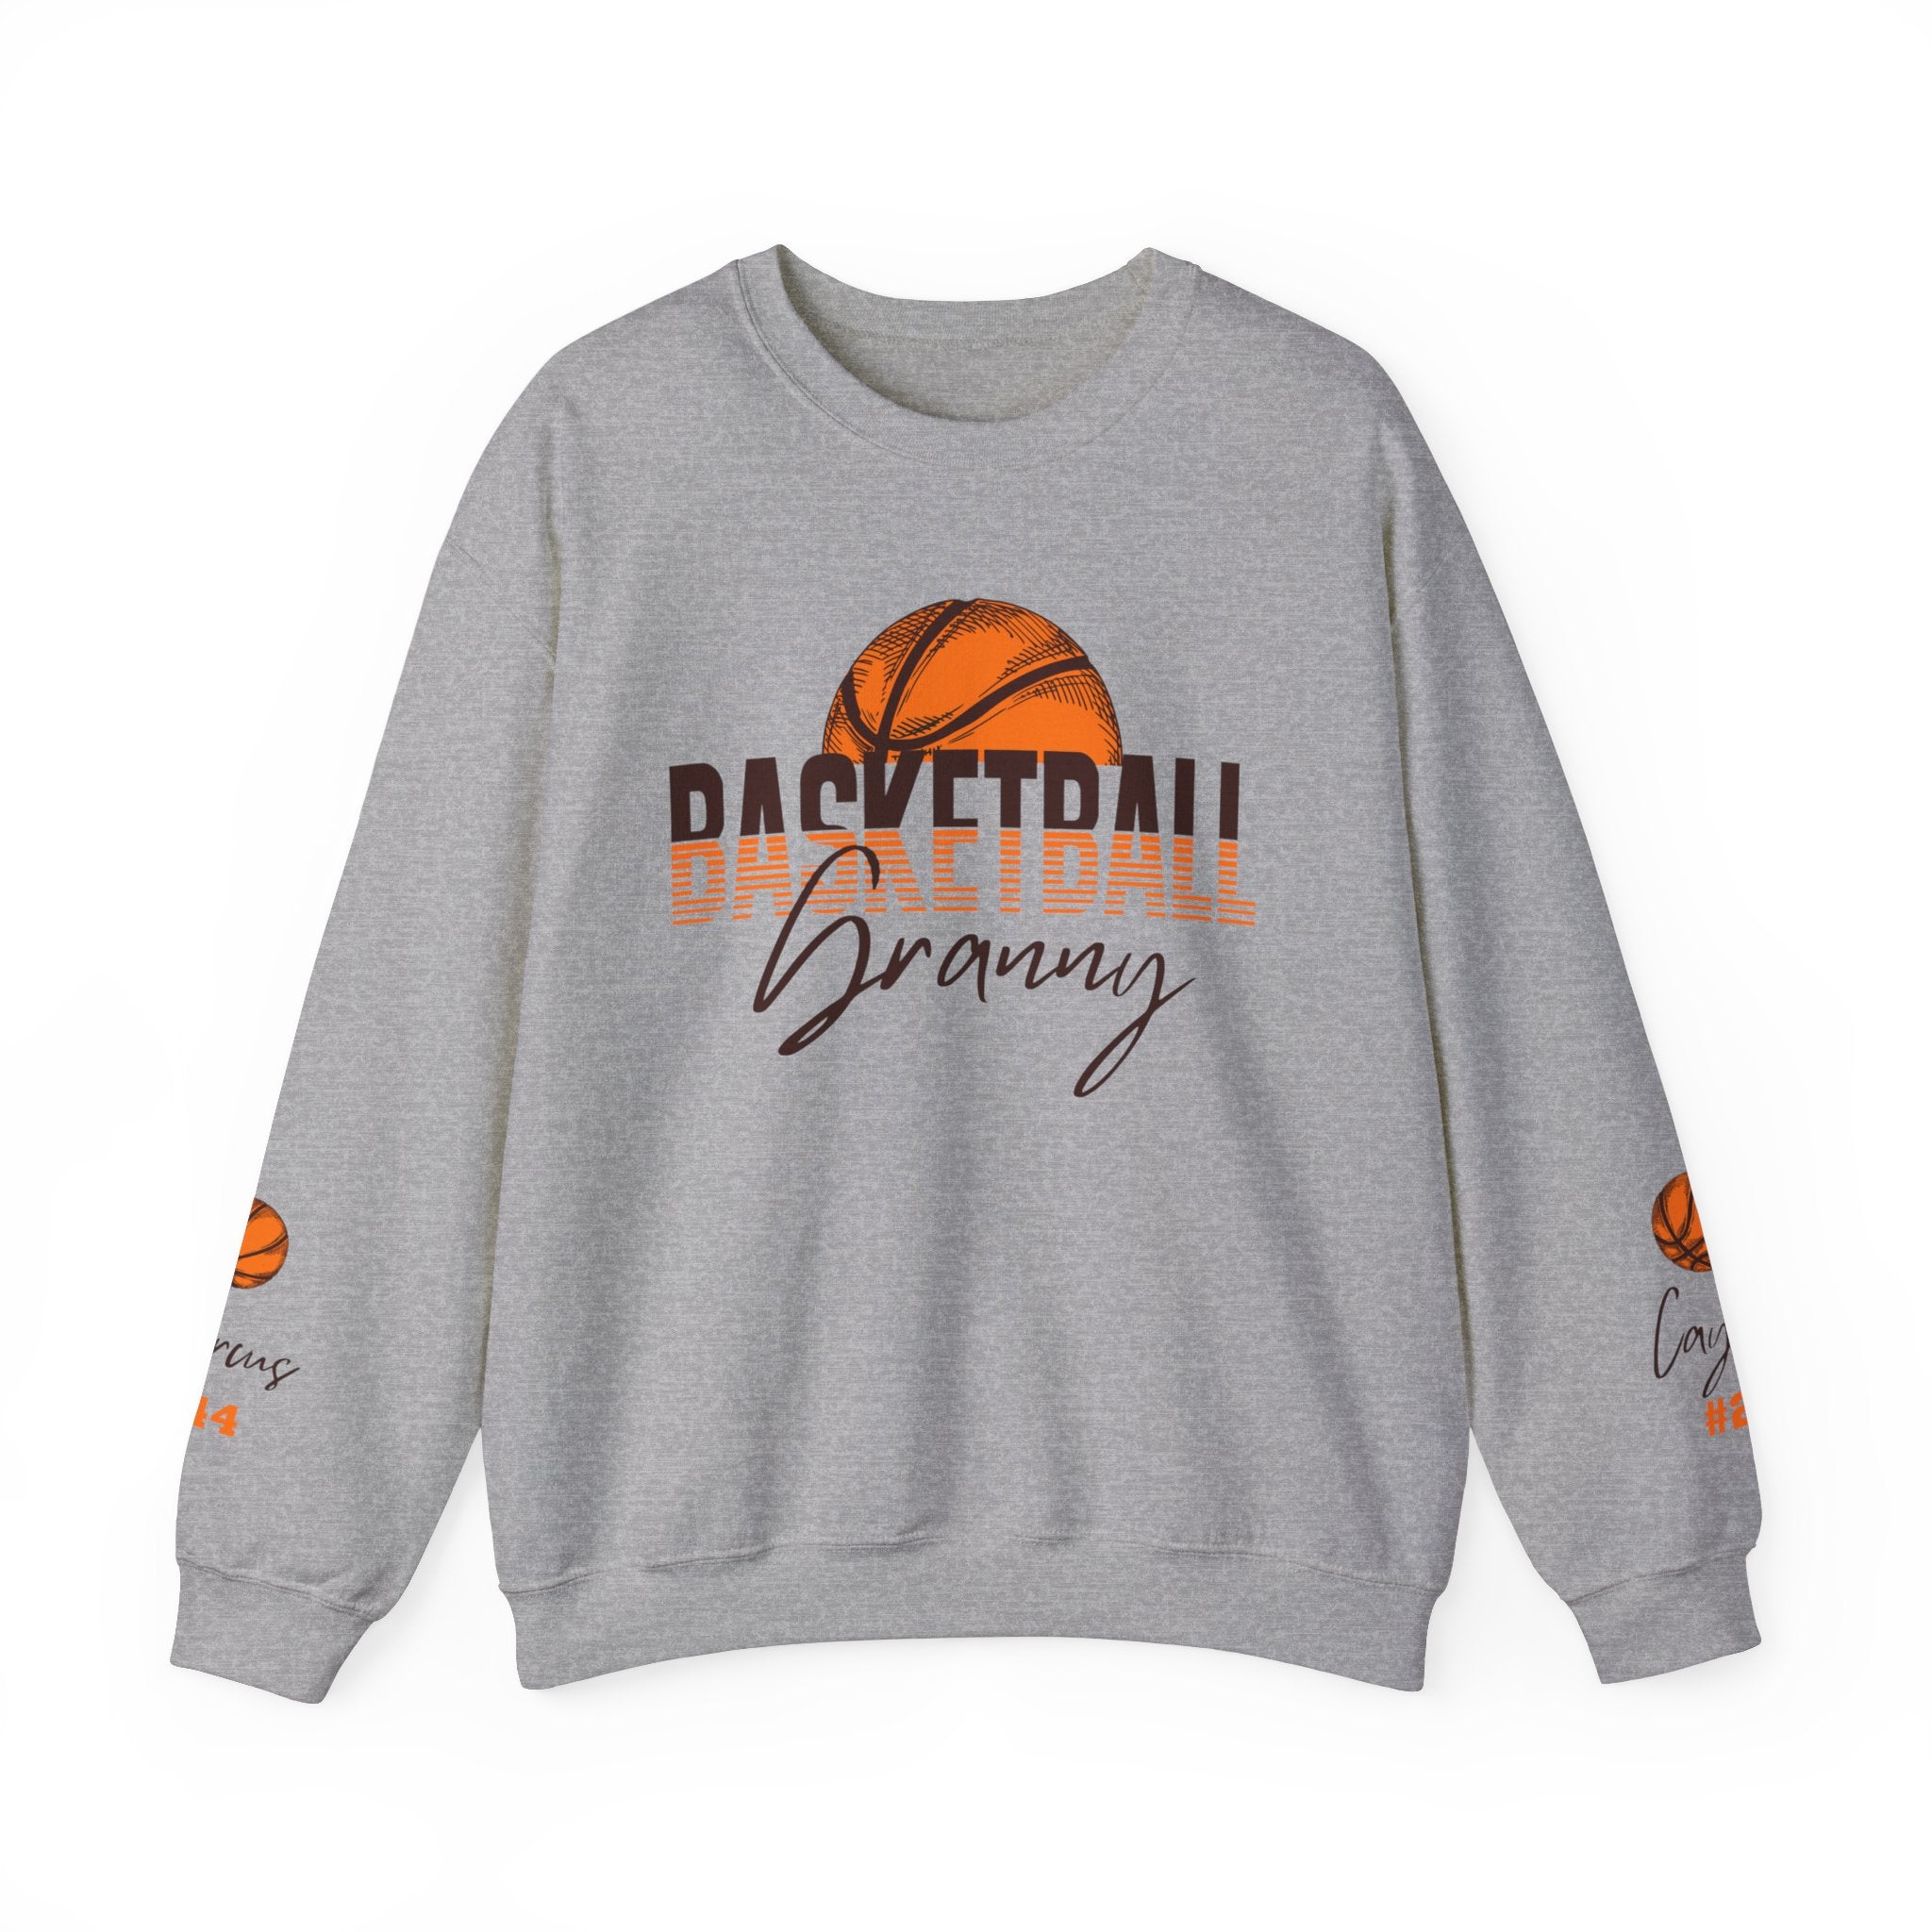 Basketball Granny Sweatshirt with Personalized Sleeves